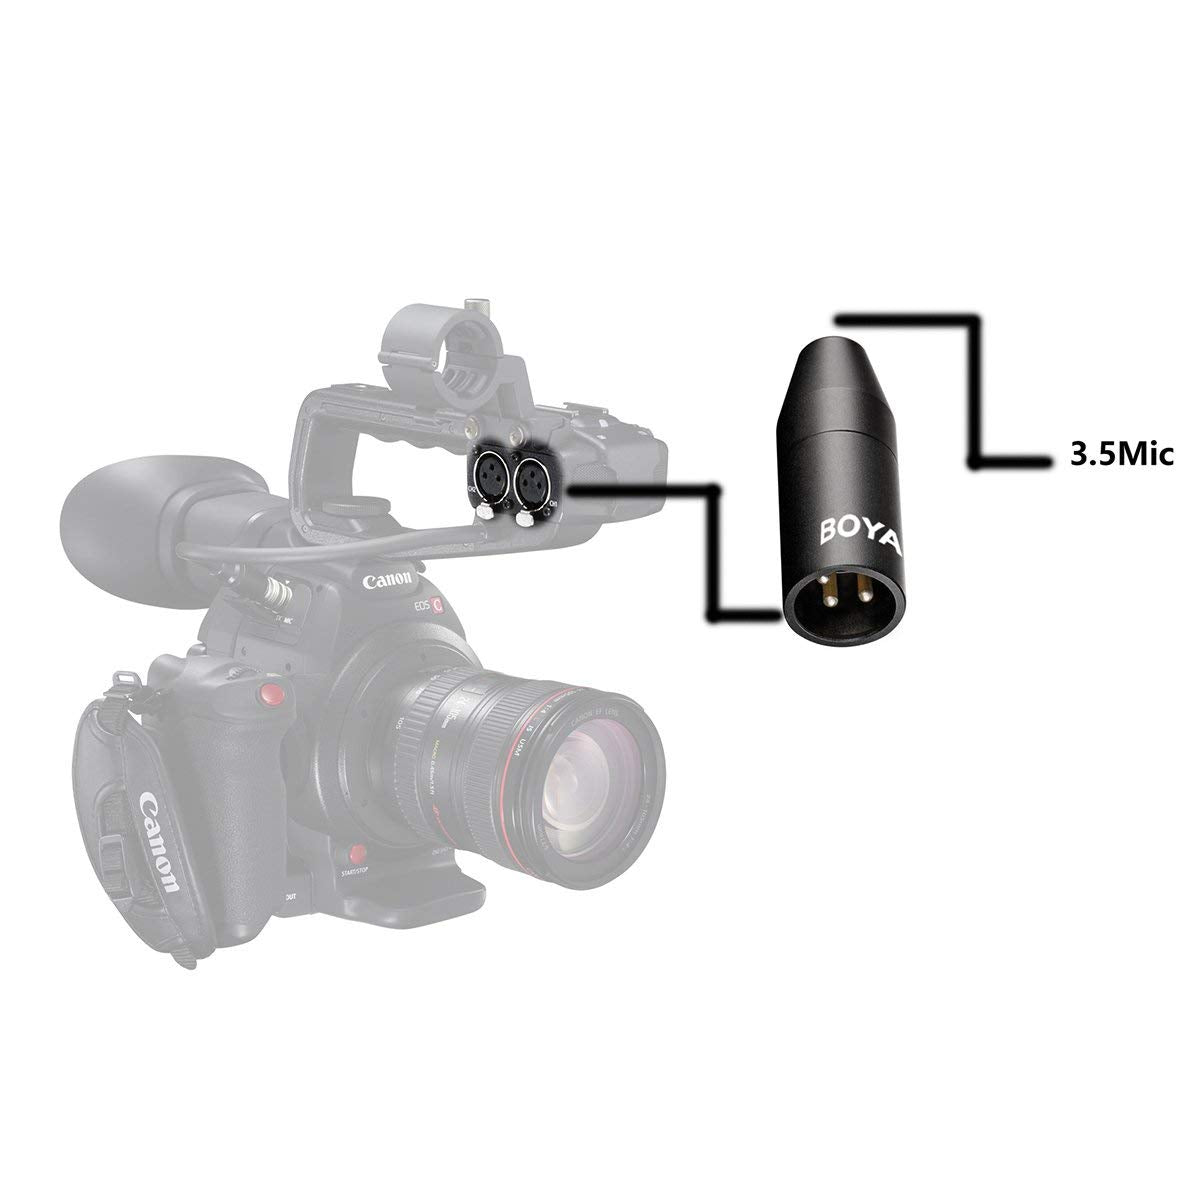 Boya 35C-XLR 3.5mm (TRS) Mini-Jack Female Microphone Adapter to 3-pin XLR Male Connector for Camcorders, Recorders, & Mixers